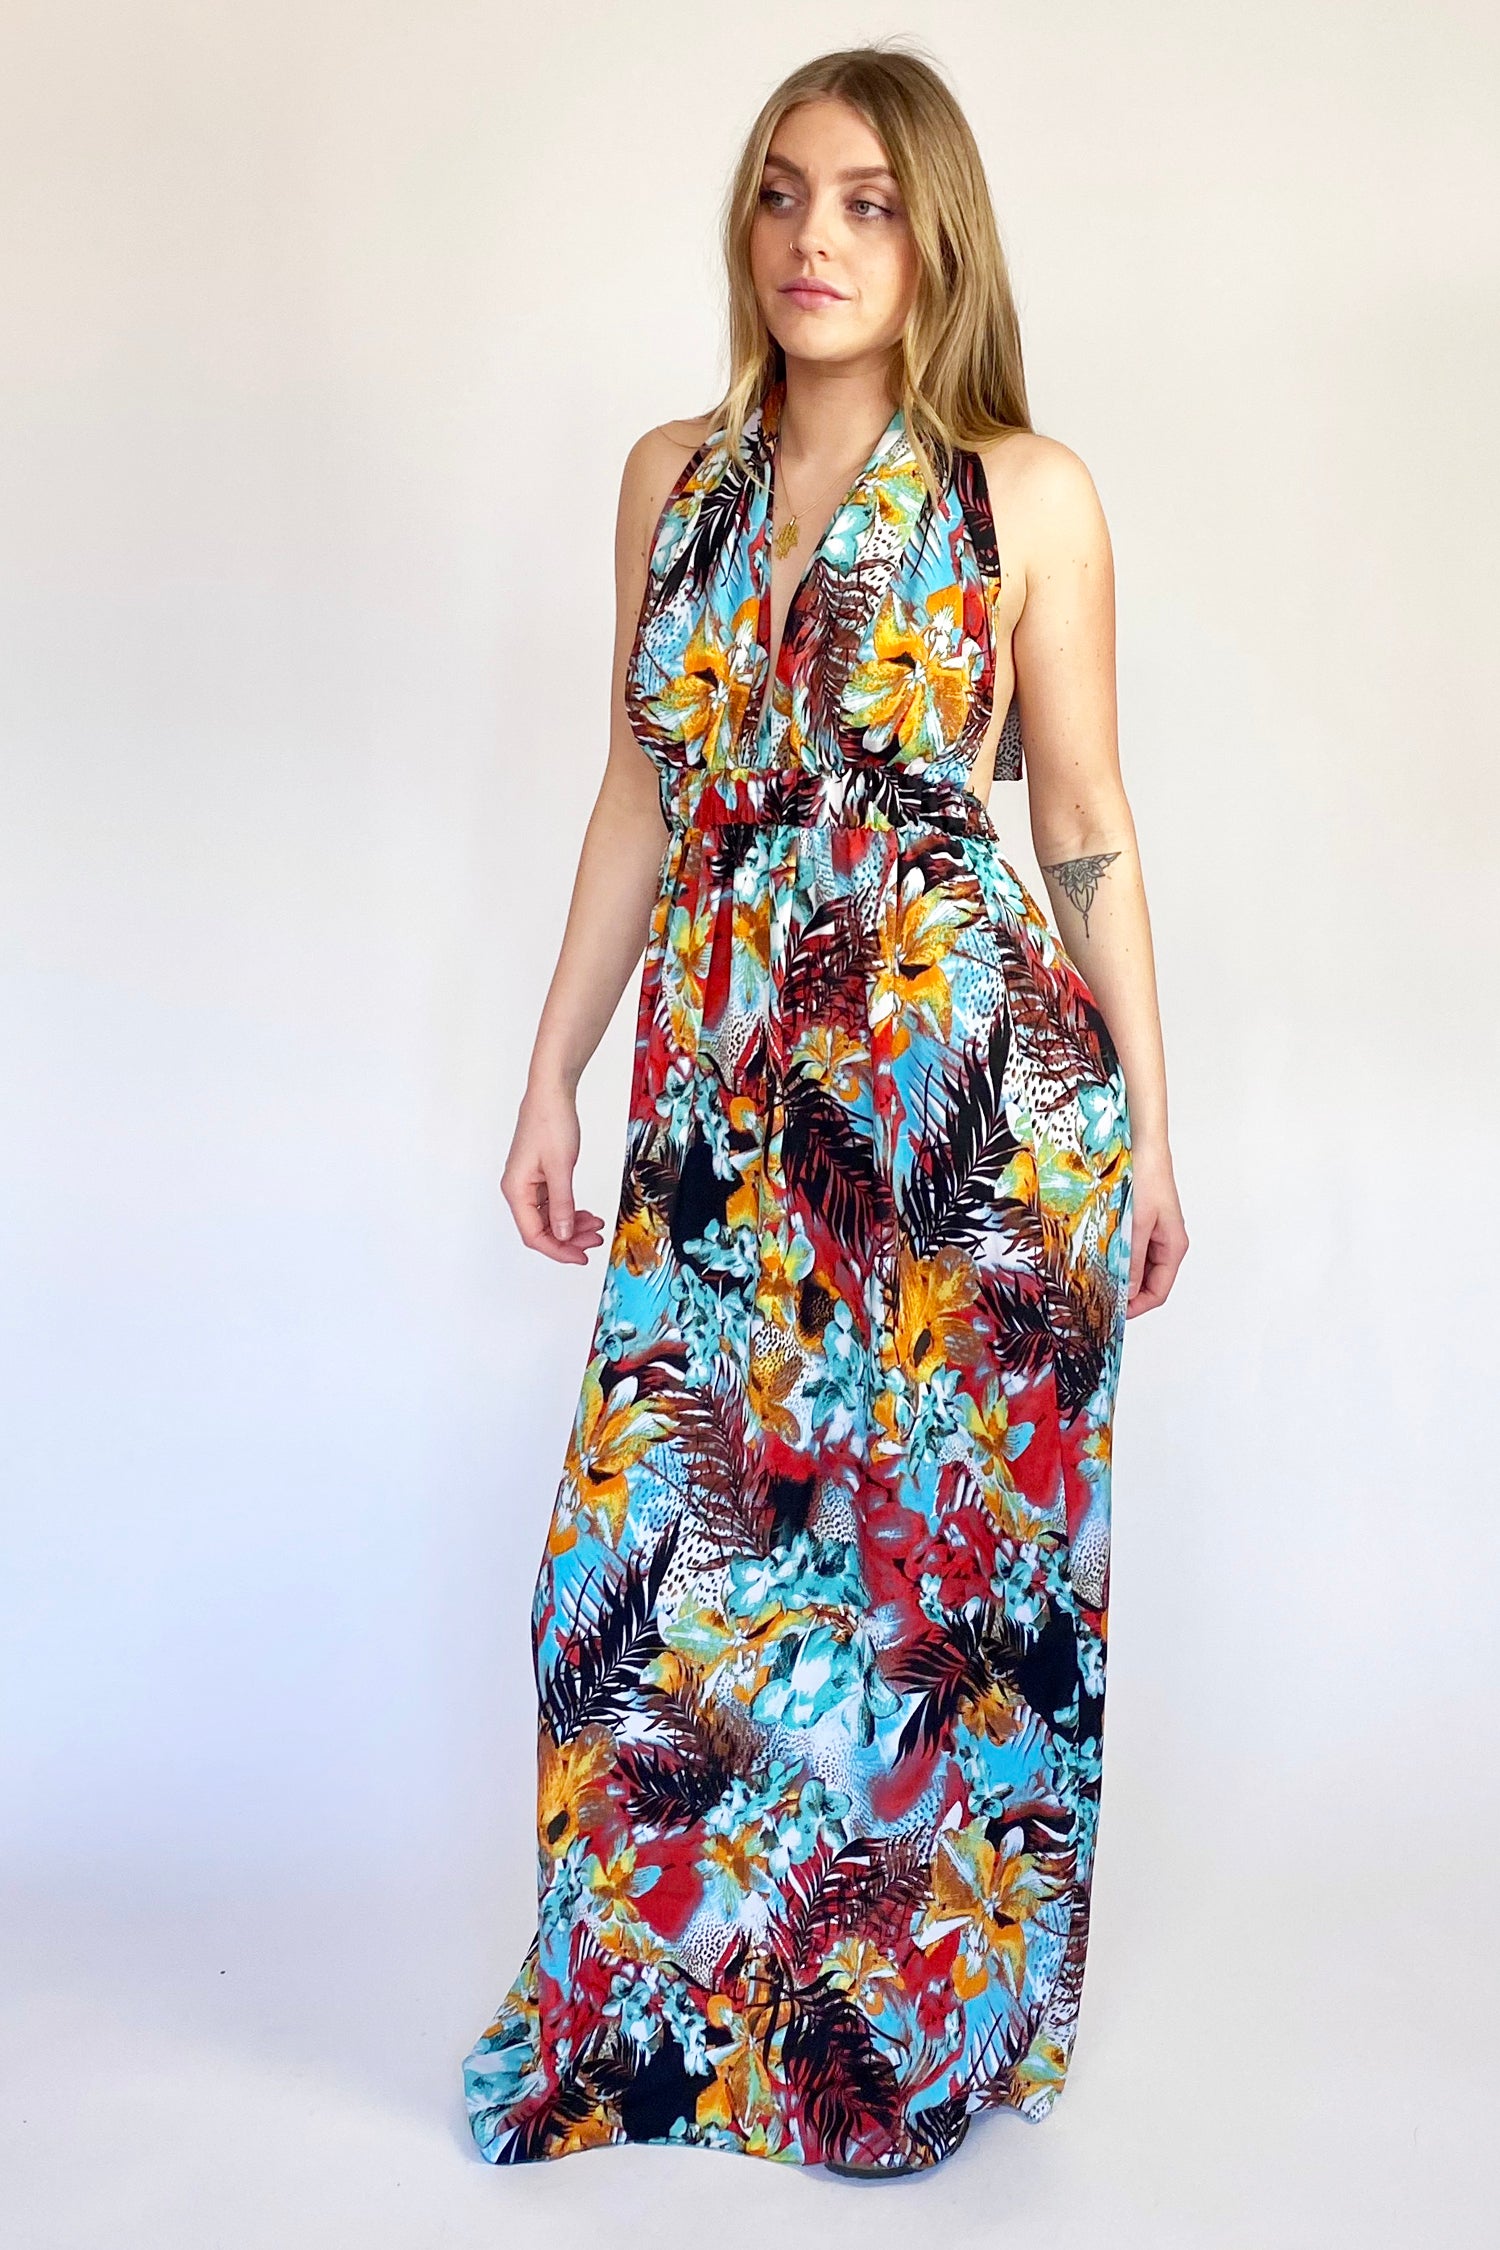 Turquoise Tropical Print Backless Maxi Dress